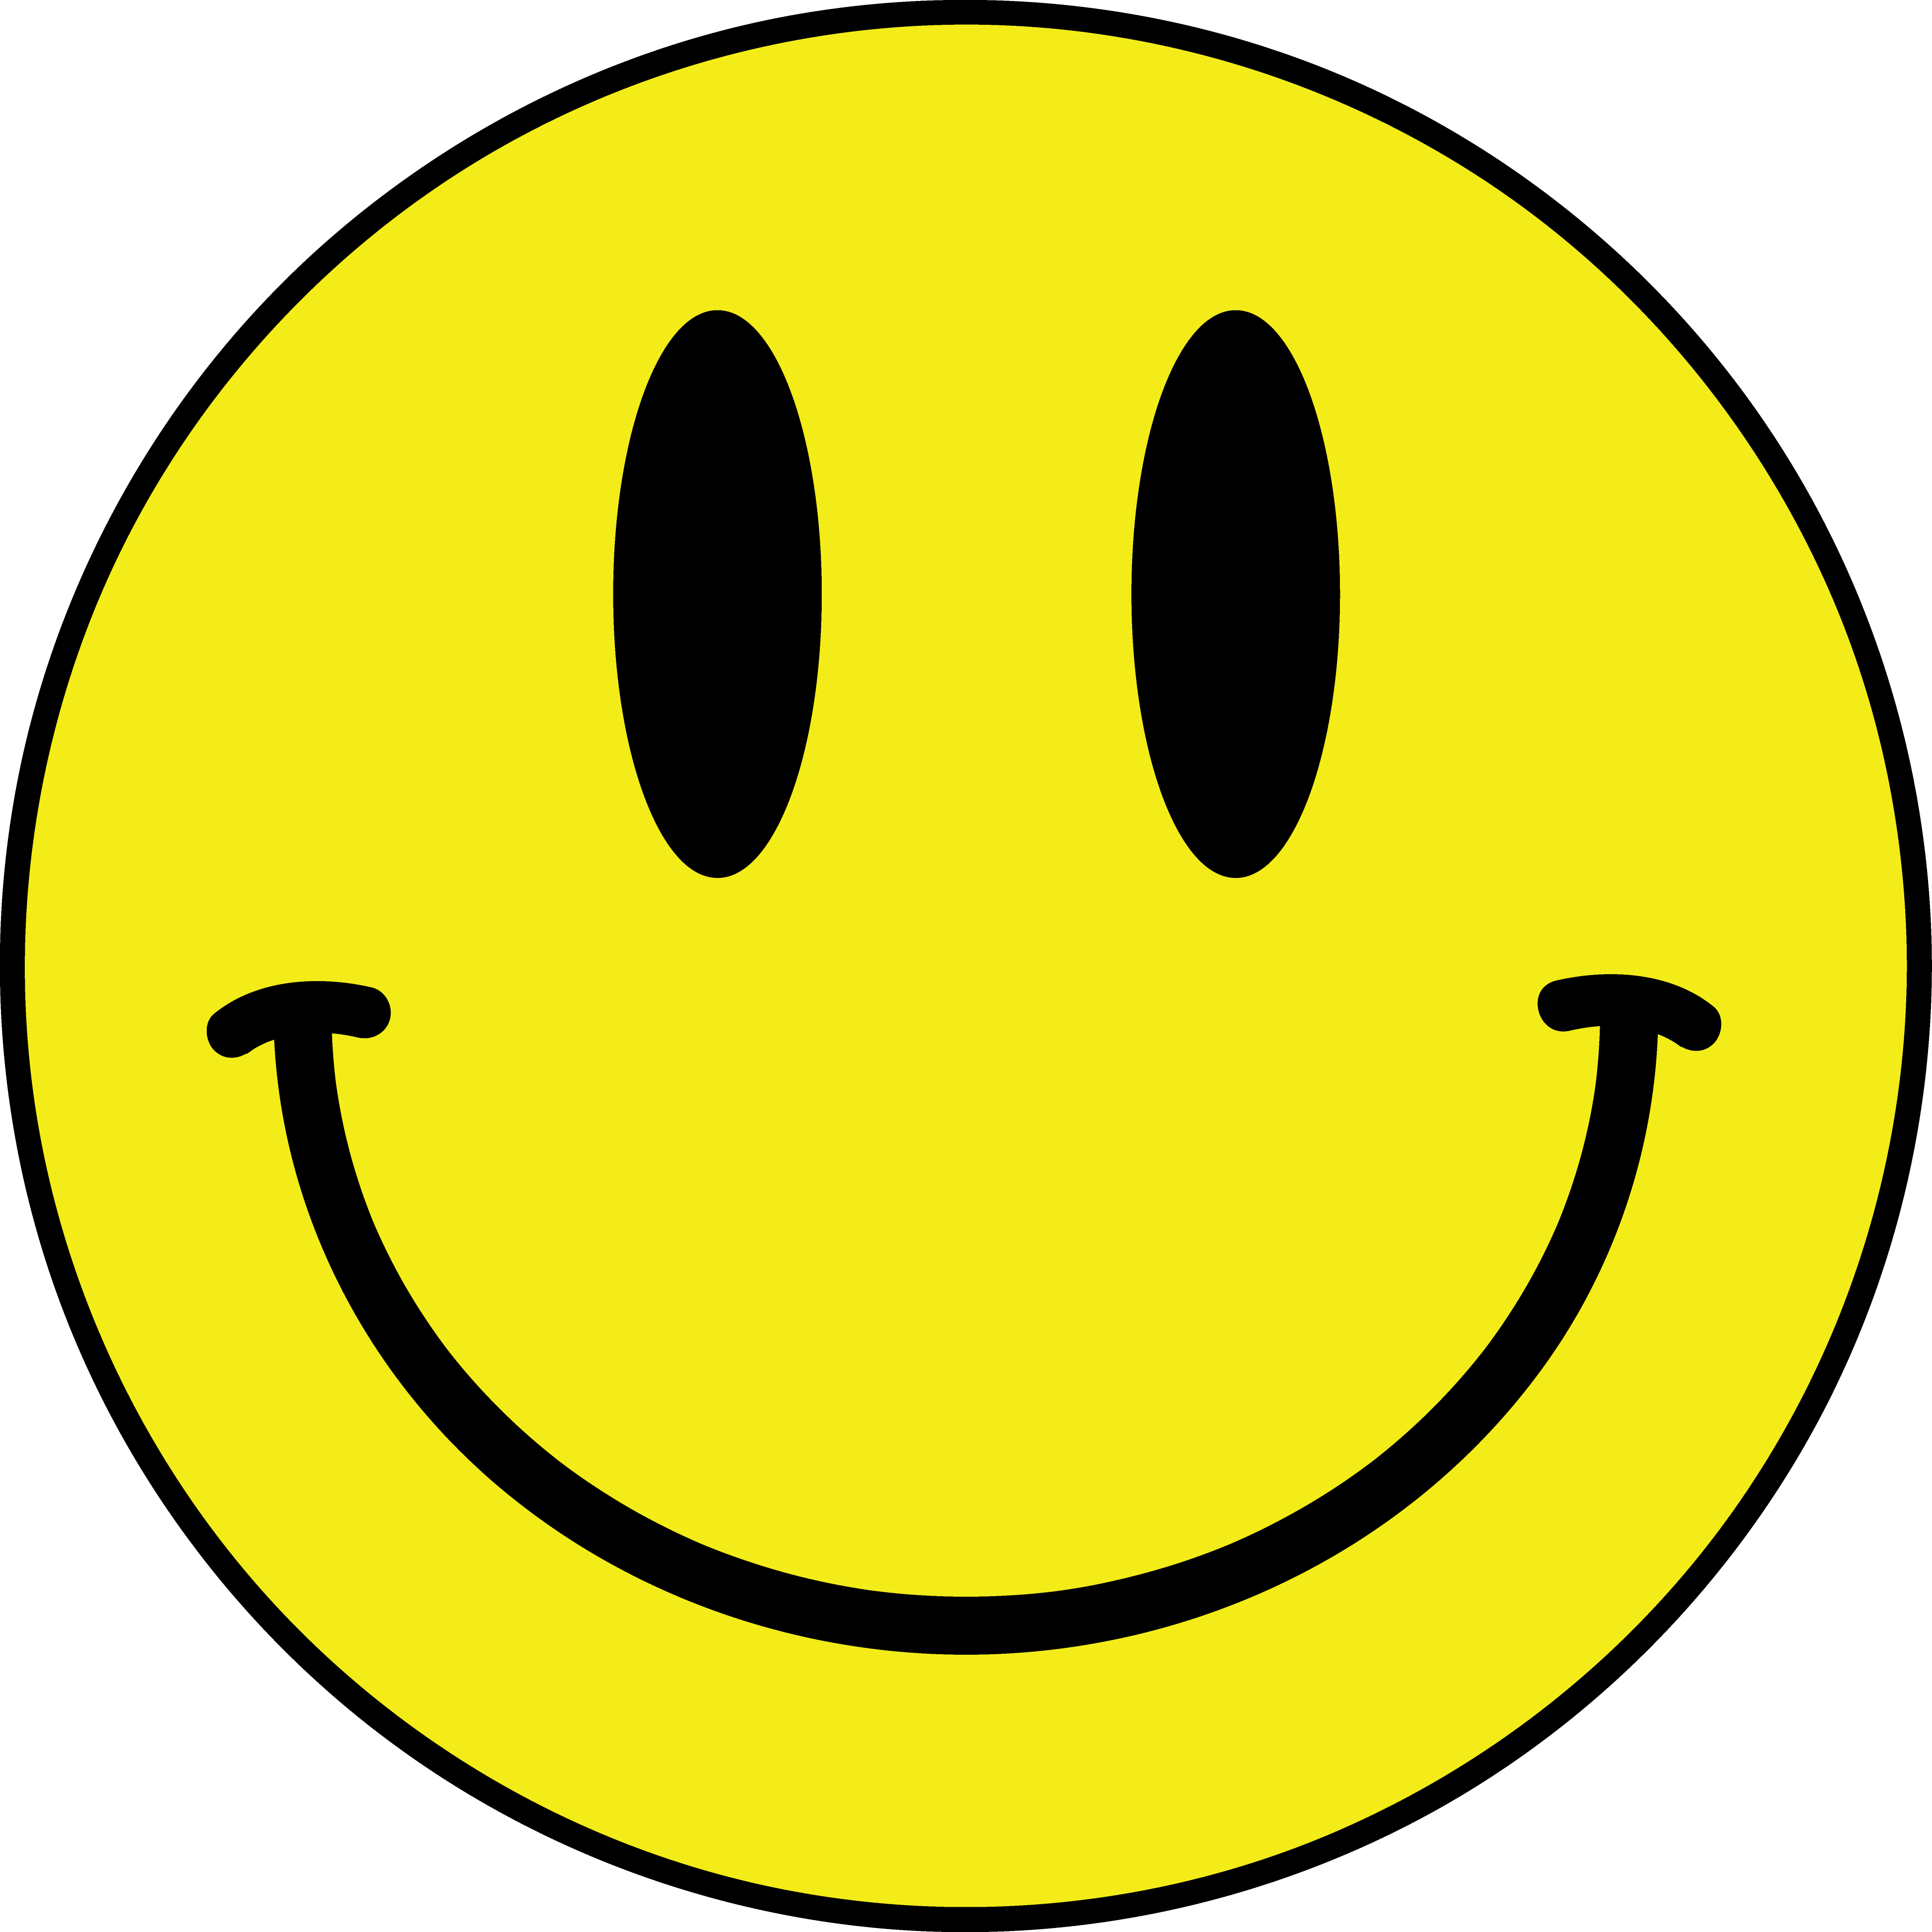 Smiley Icon Clip art - Smiley PNG png download - 3896*3895 - Free ...